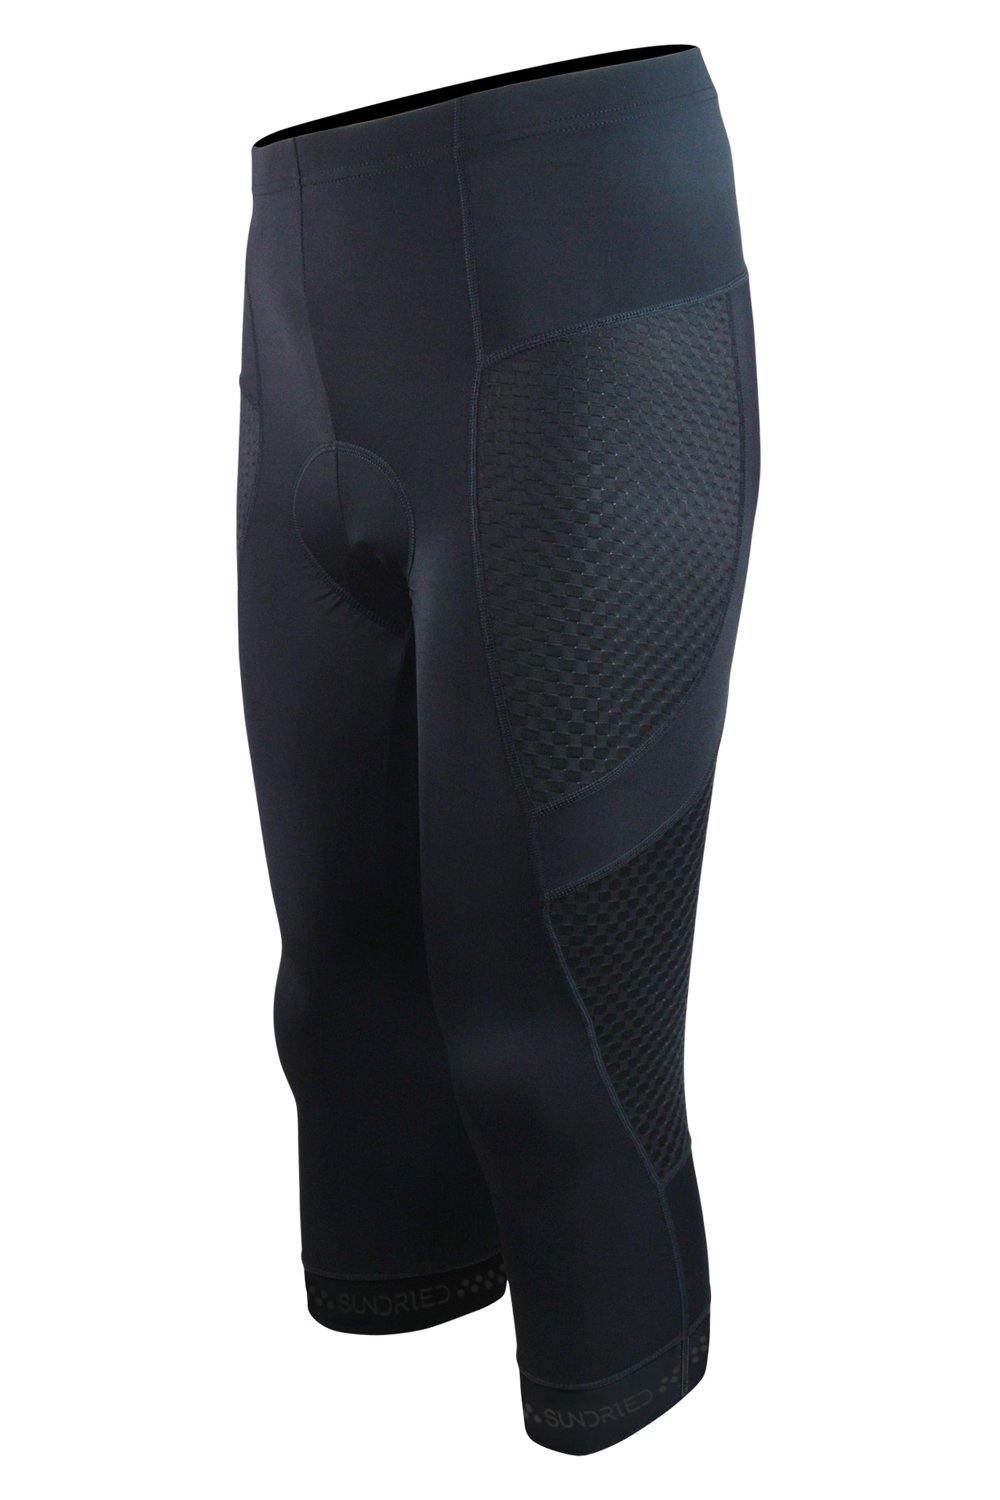 Sundried Stealth 3/4 Cycle Tights